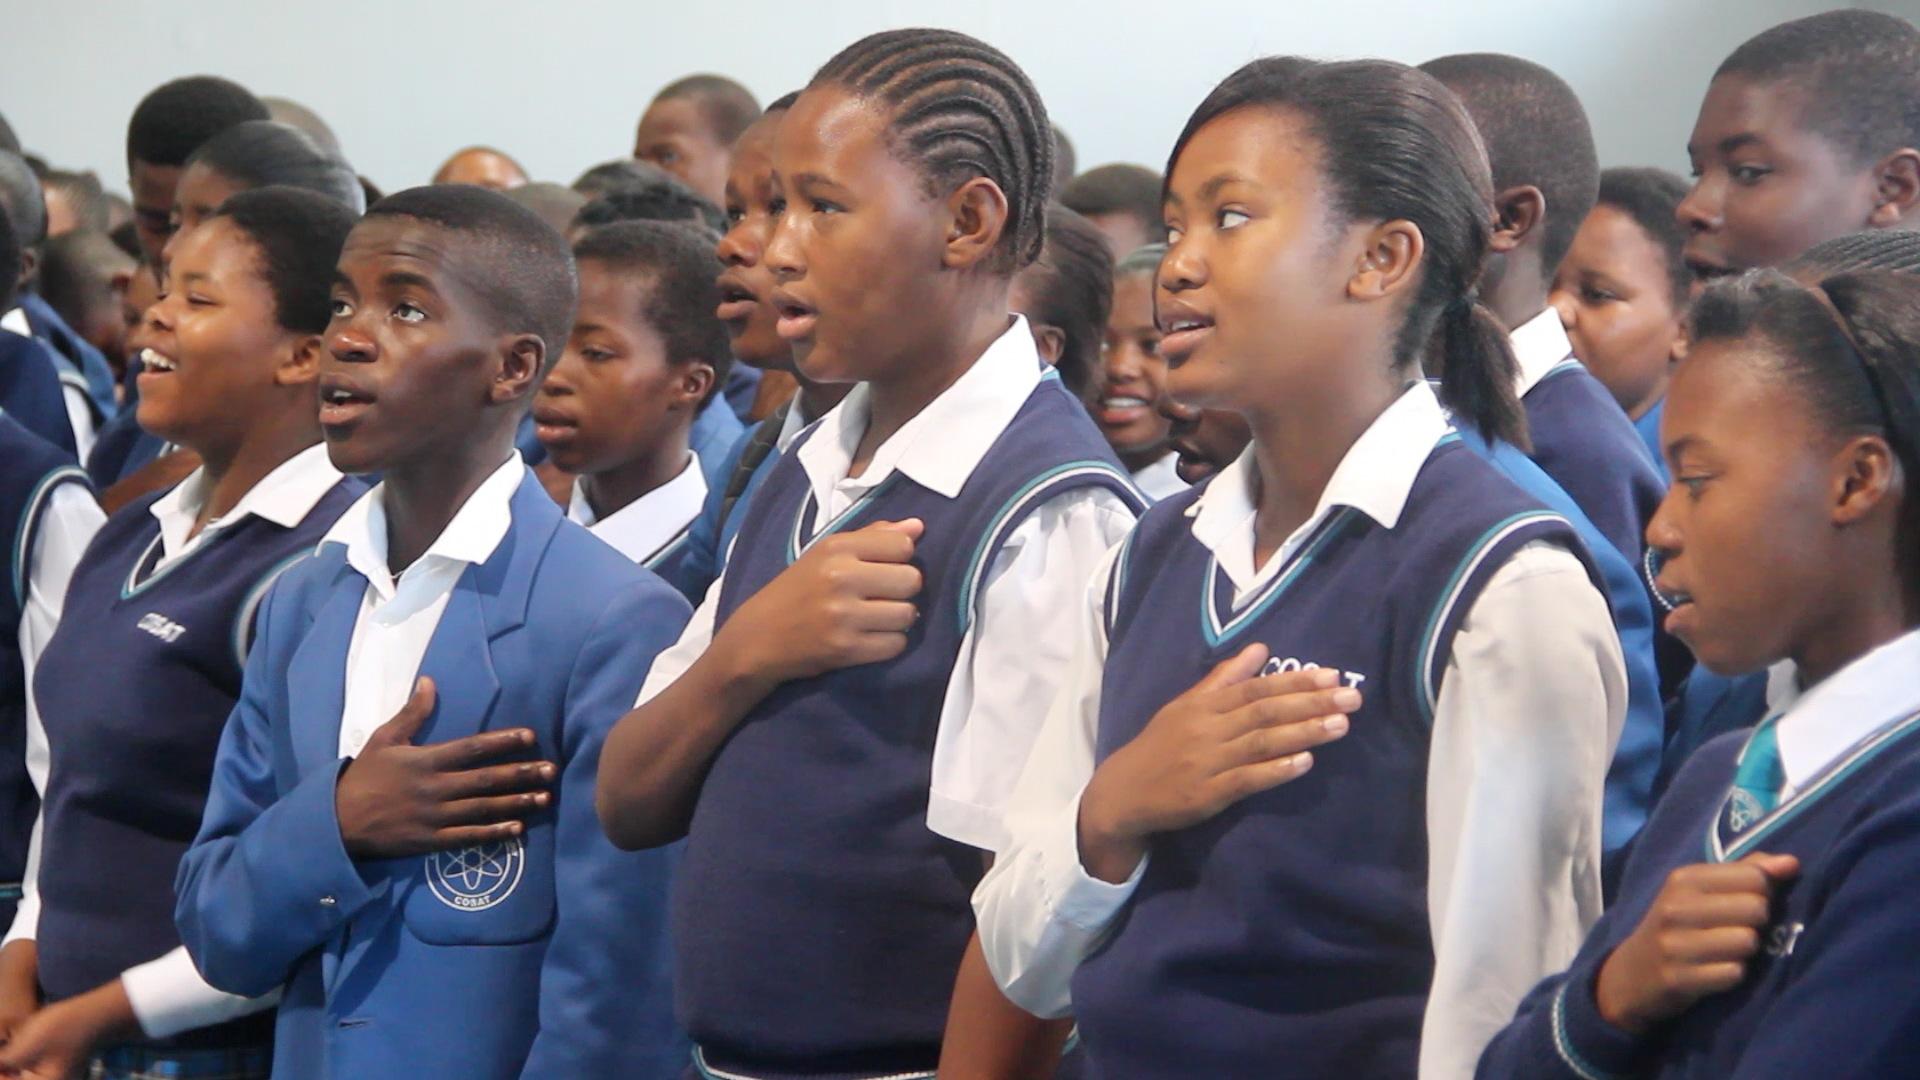 COSAT students sing national anthem.